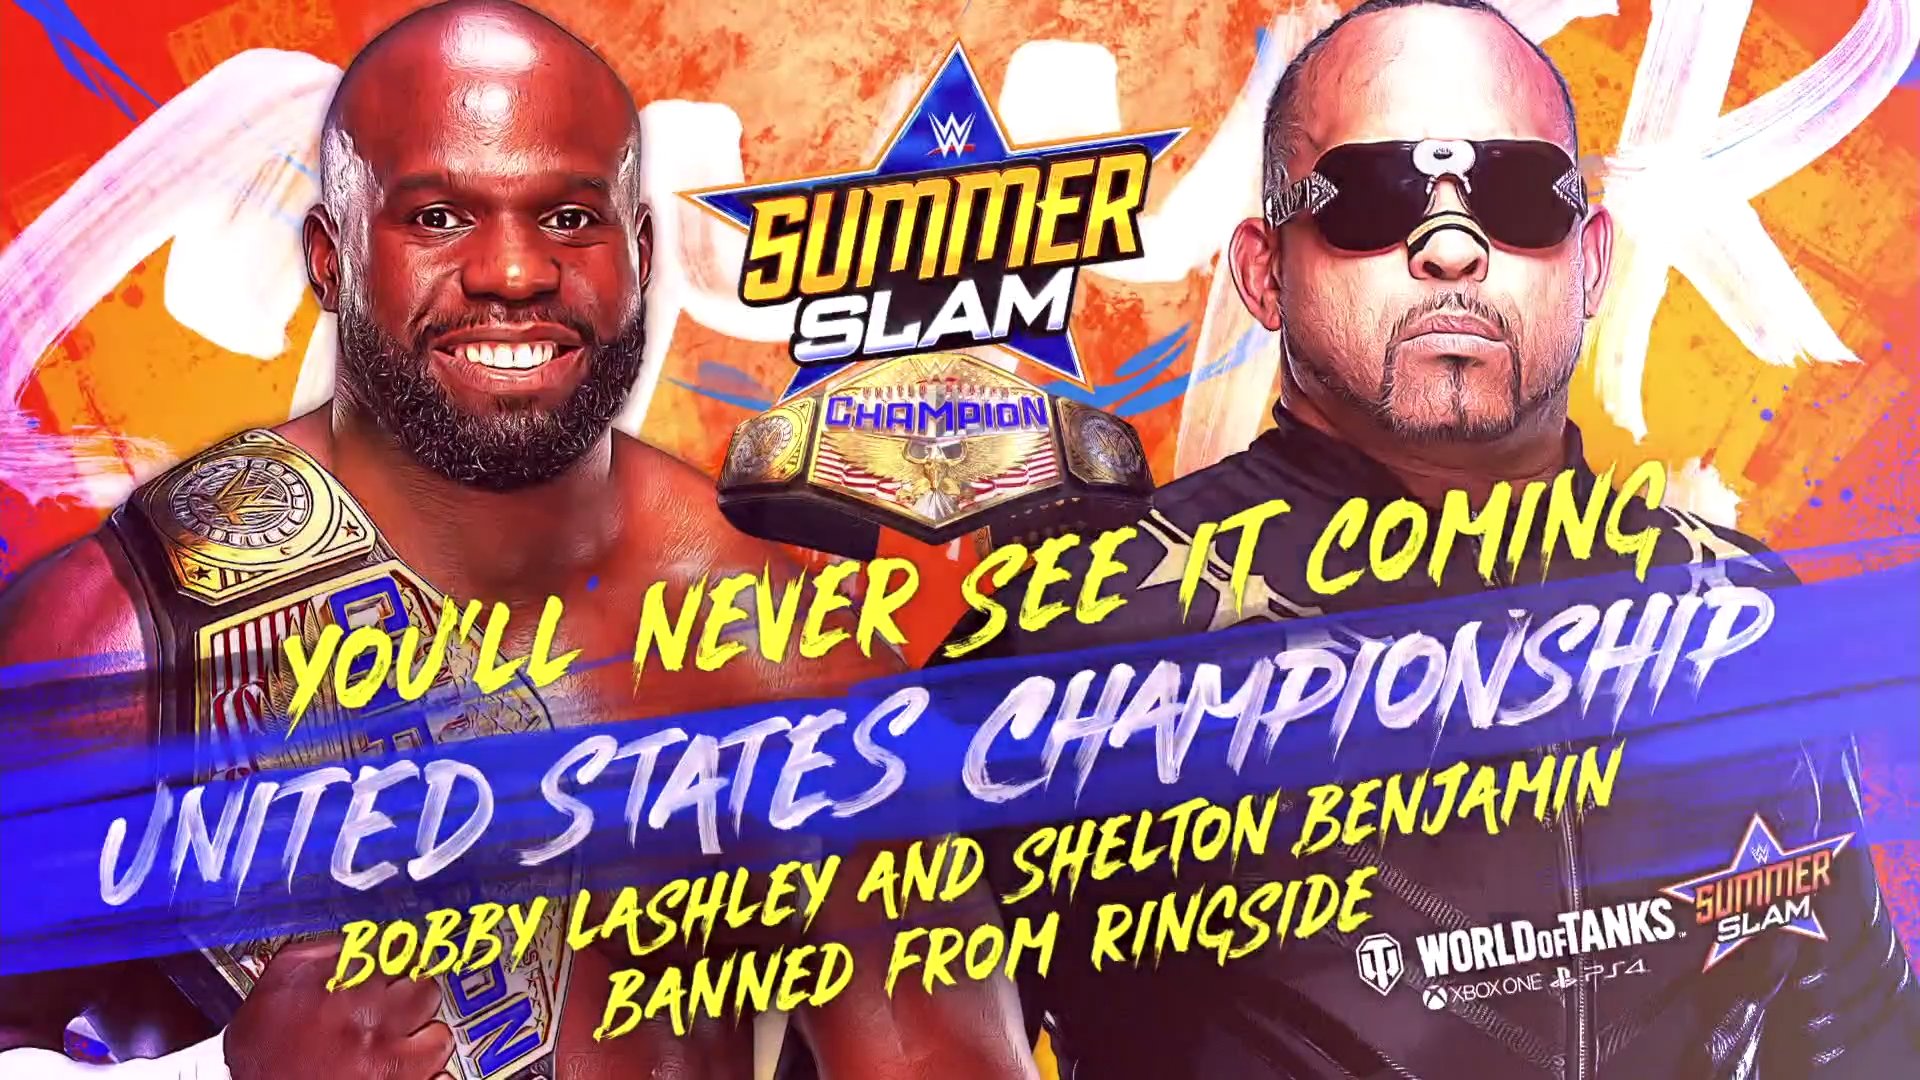 Changes and Notes for the WWE SummerSlam Card